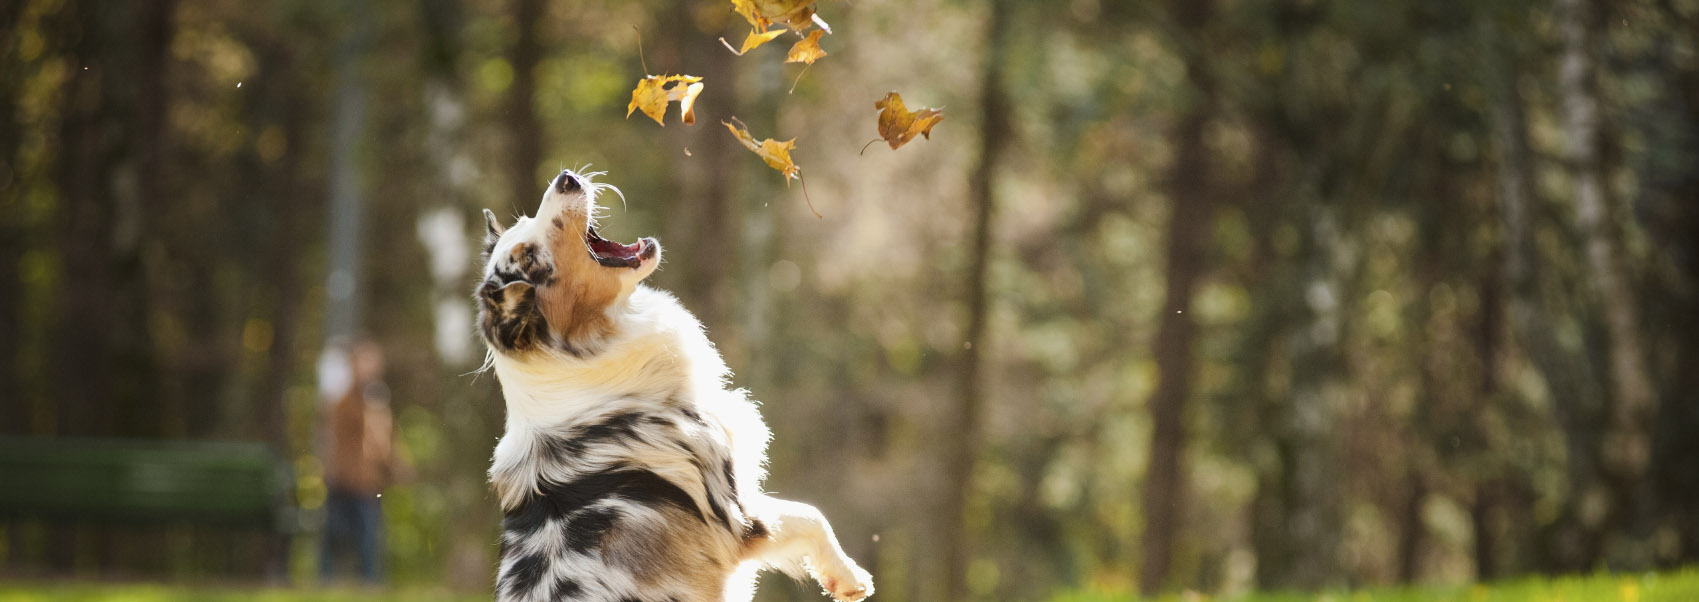 young merle Australian shepherd playing with leaves in autumn